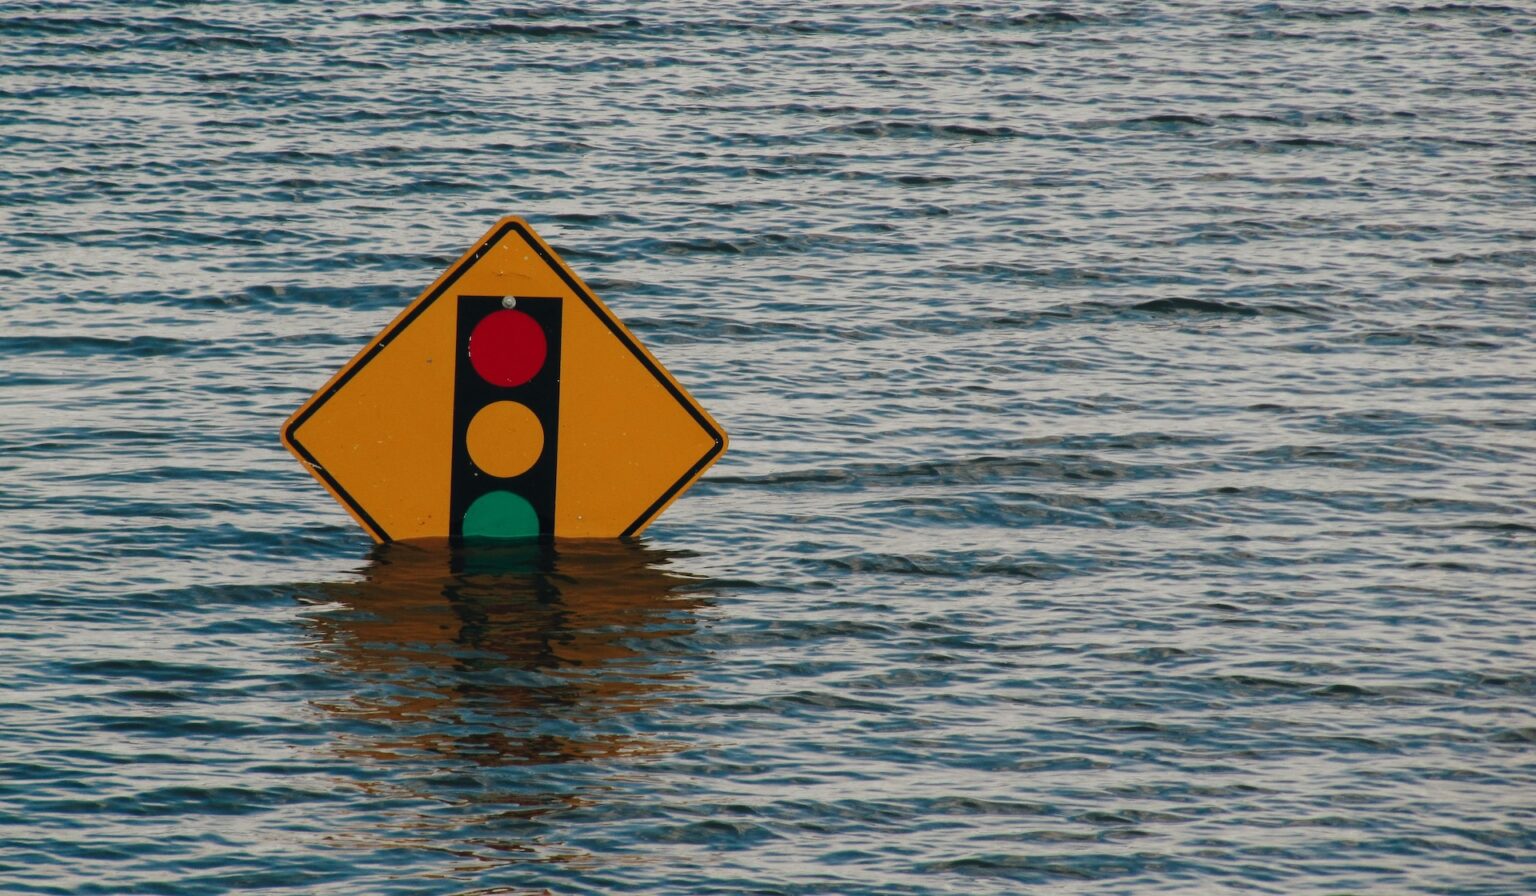 Streetlight sign partially submerged under water